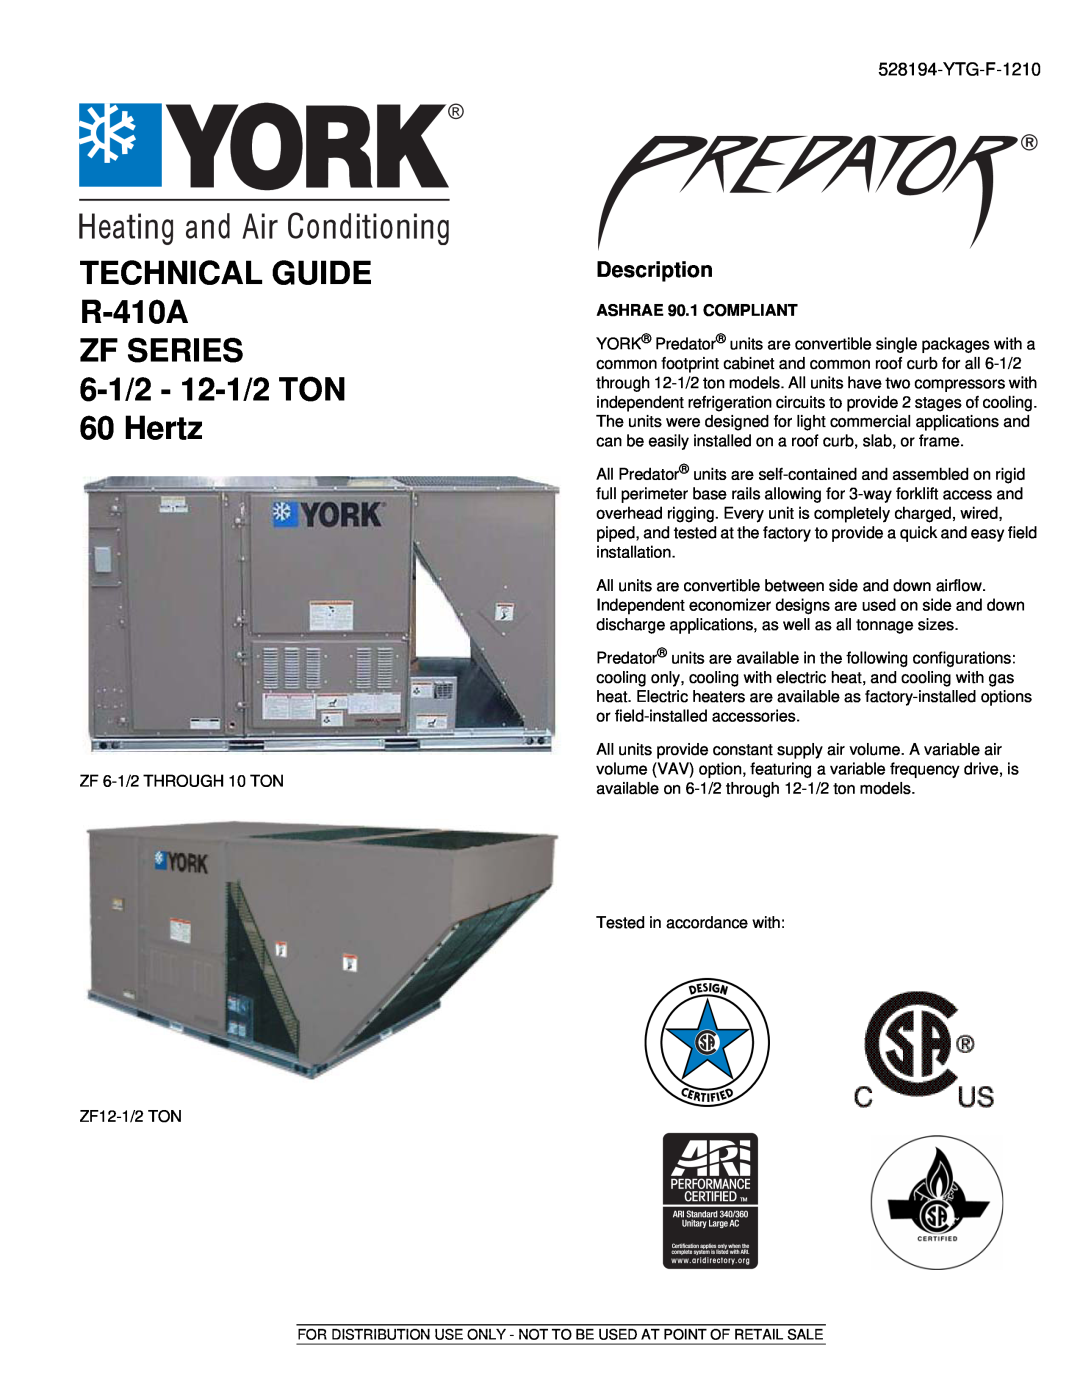 York R-410A dimensions DNX024-048, 2-4Ton, List Of Tables, General, Safety Considerations, DANGER, WARNING or CAUTION 